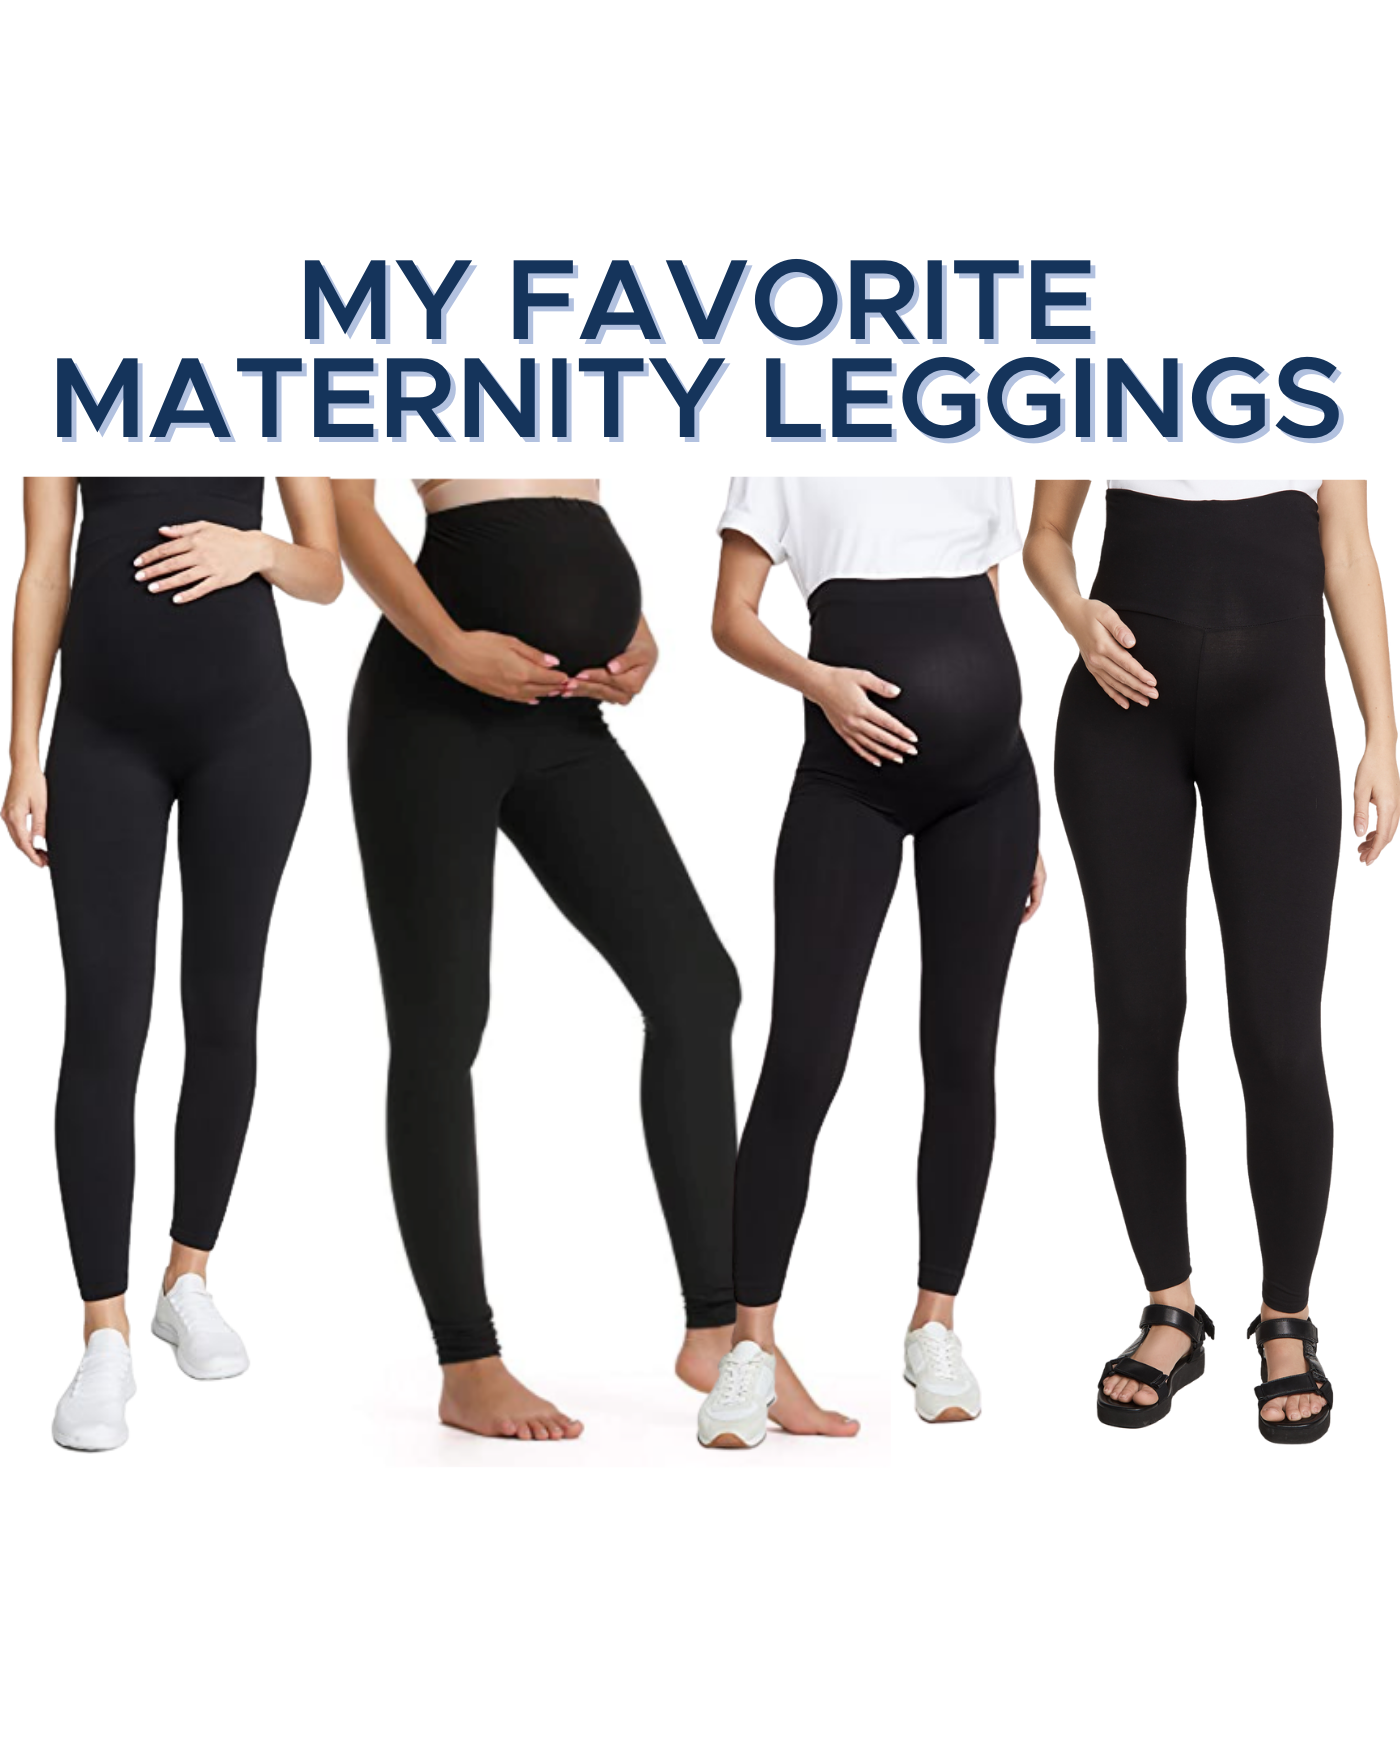 My Favorite Maternity Leggings (and joggers) - Blue Mountain Belle